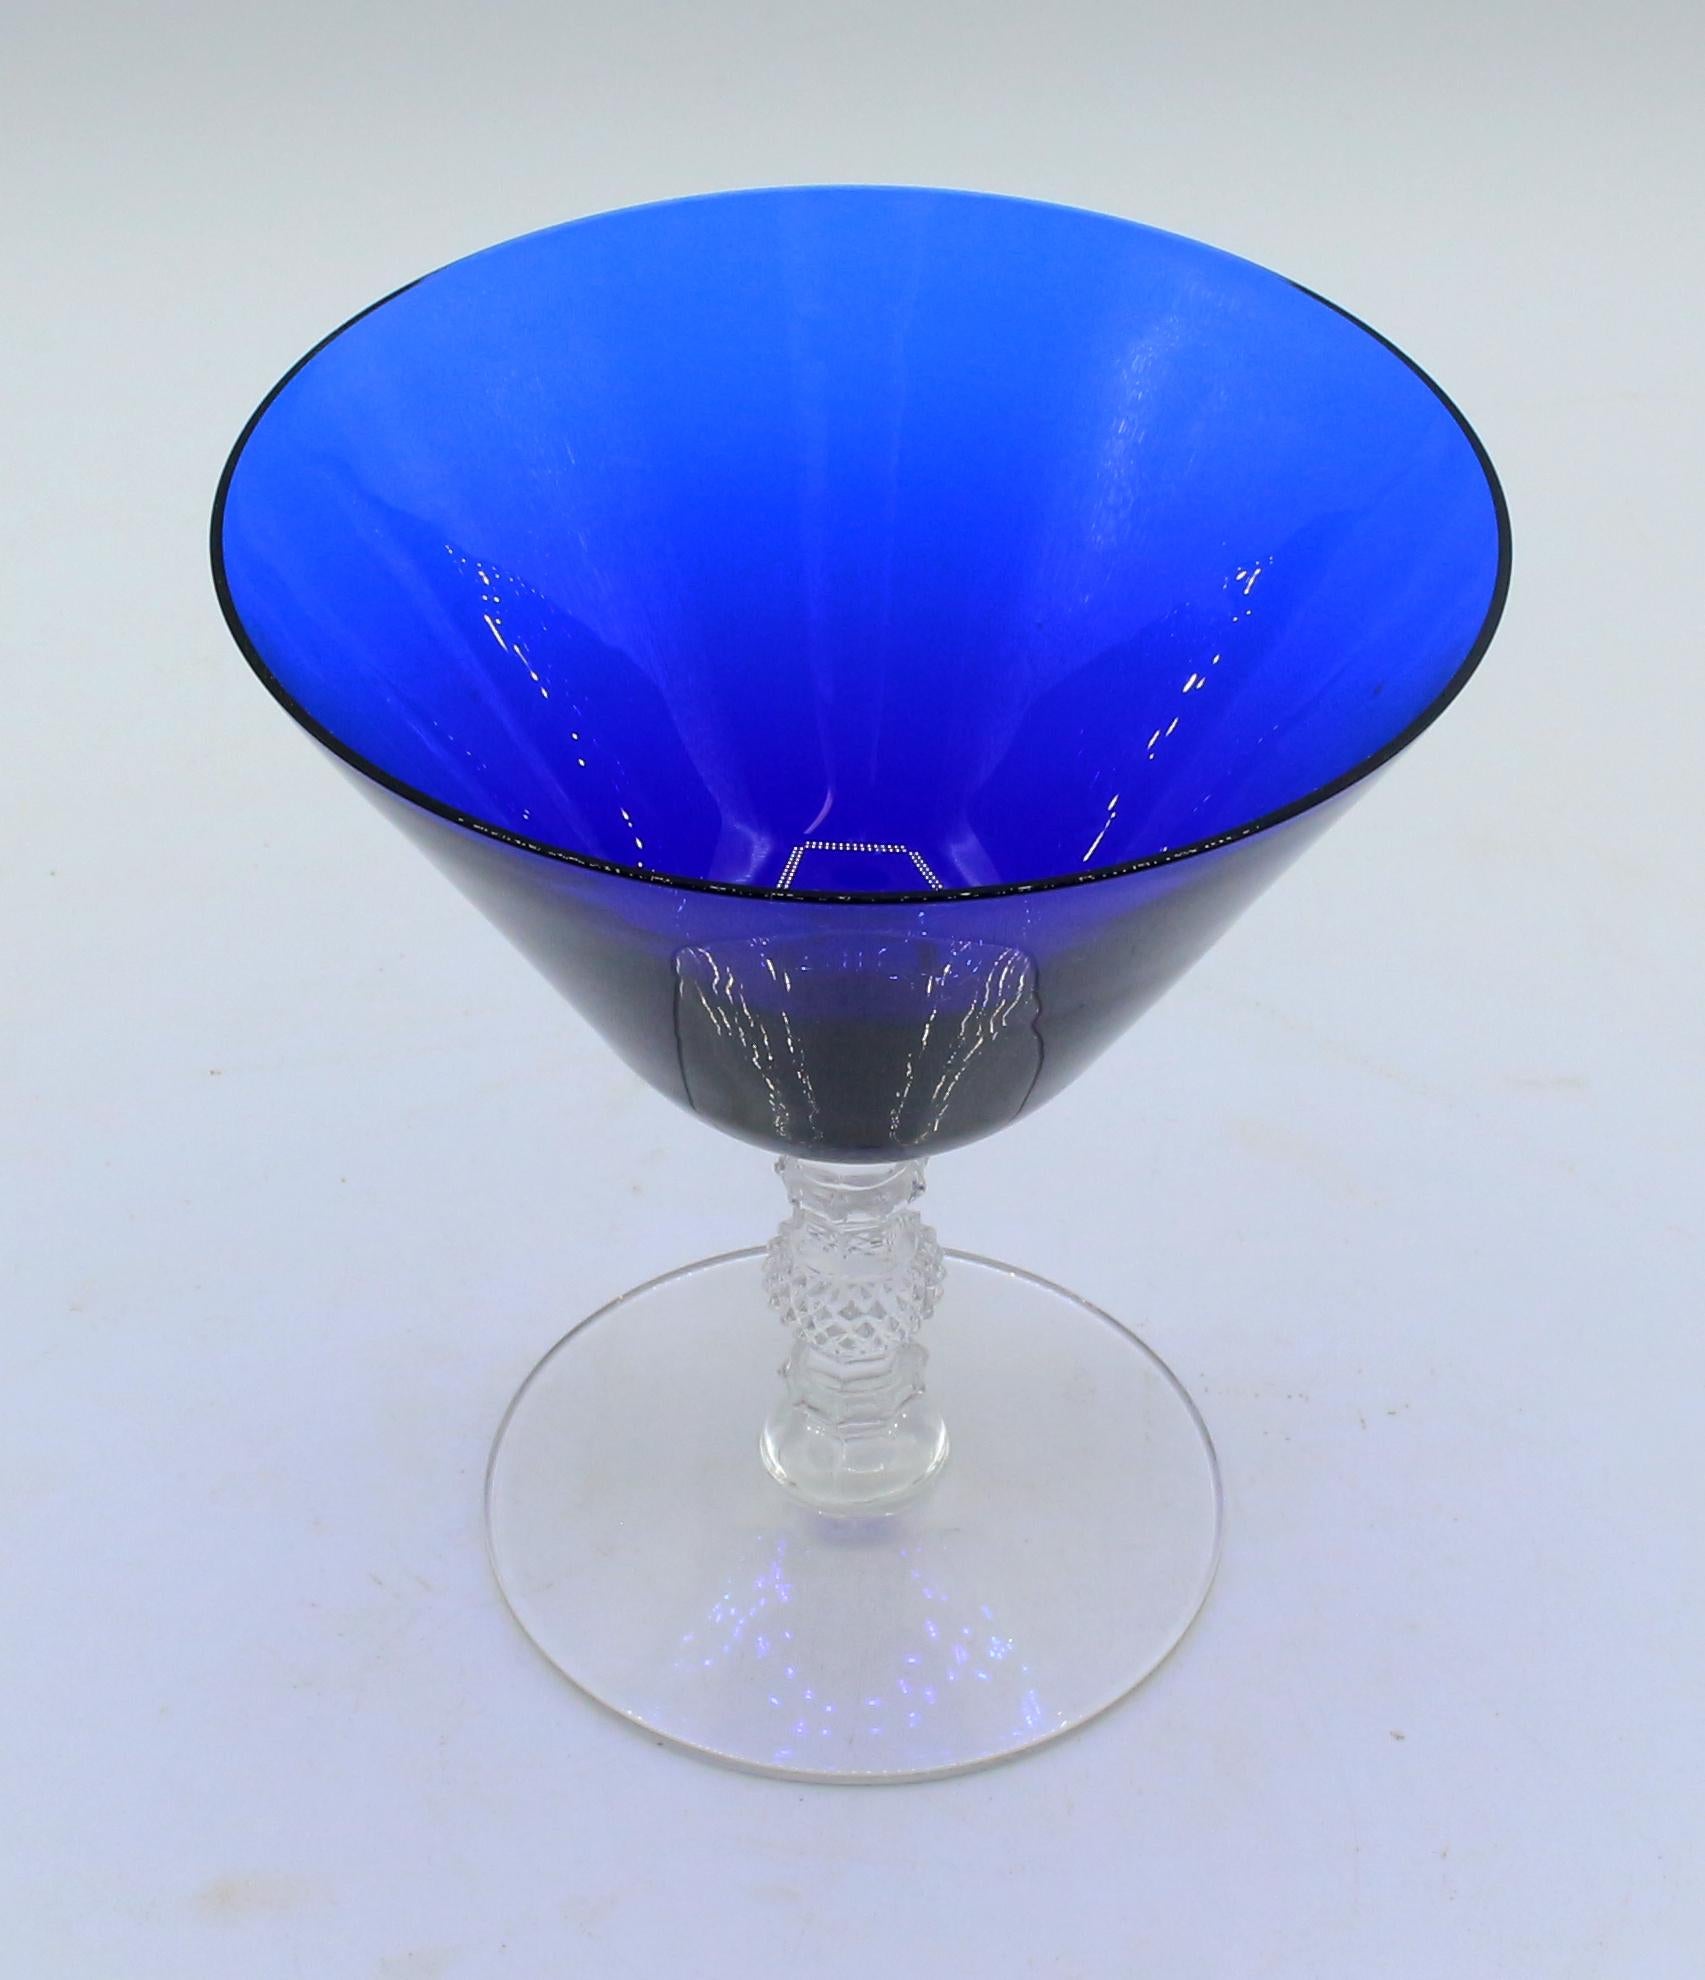 A set of 12 +1 sherbets or champagnes by Cambridge Glass Co., Ohio, c.1930s. Cobalt Blue bowls with faceted, molded clear glass stems & bases. Pattern 3122, rarely found. 
4 5/8